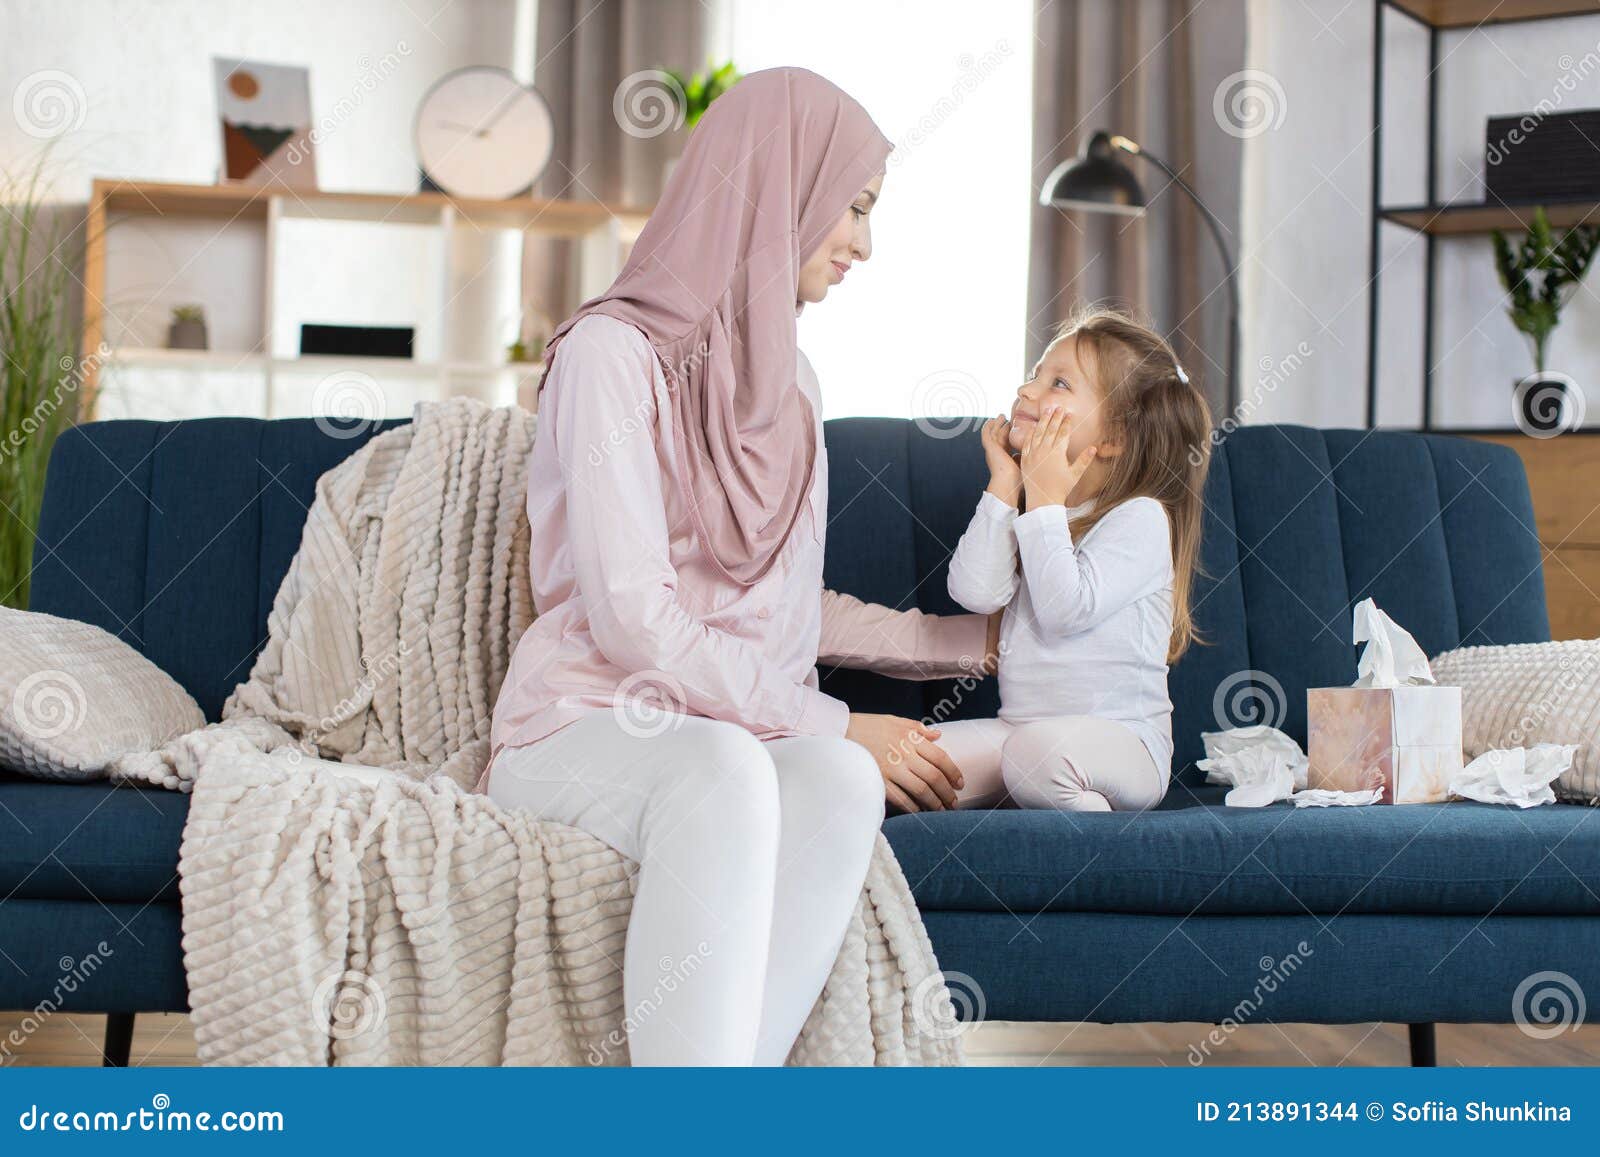 morning higiene routine at home. happy muslim mom in hijab, sits on sofa at cozy room and looks at her cute little